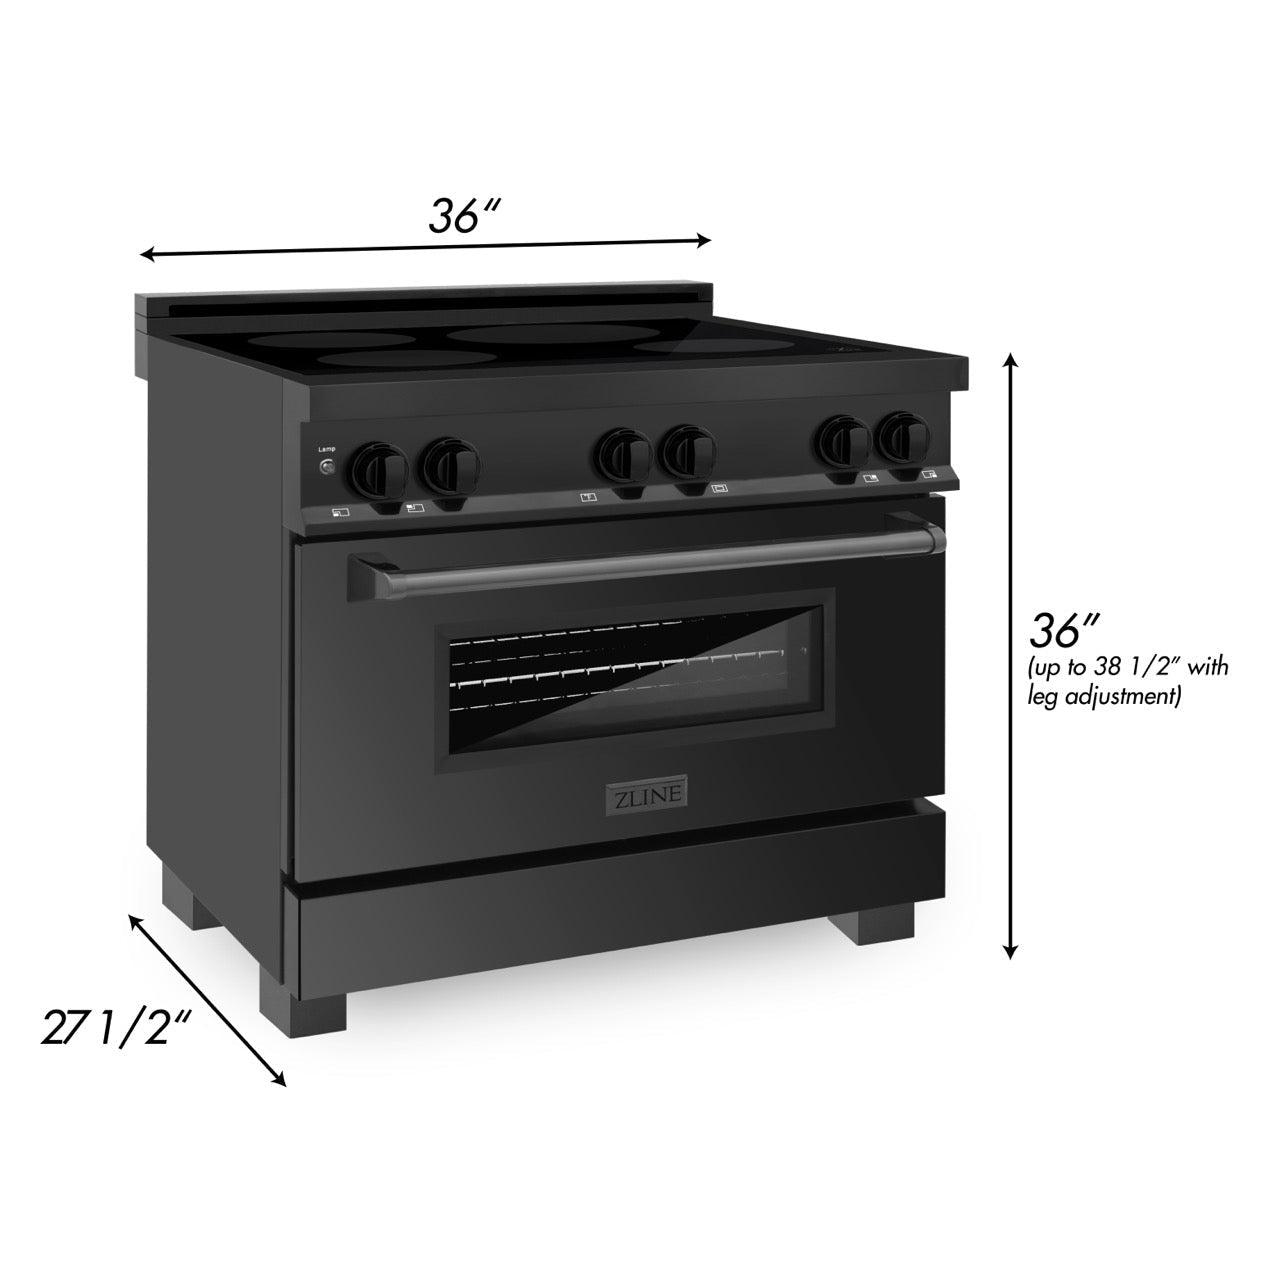 ZLINE 36 in. 4.6 cu. ft. Induction Range with a 4 Element Stove and Electric Oven in Black Stainless Steel (RAIND-BS-36) dimensional diagram with measurements.